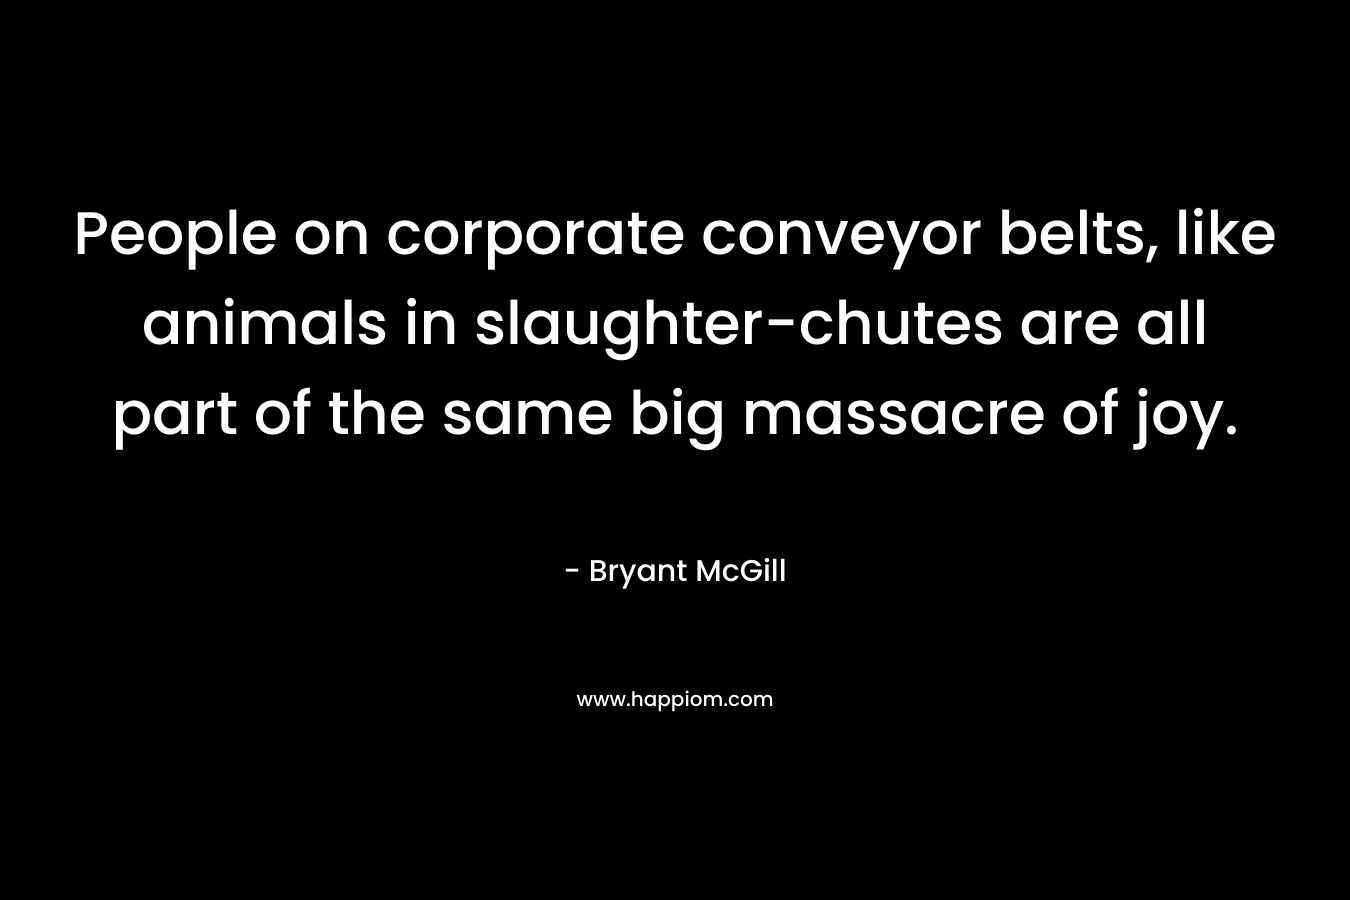 People on corporate conveyor belts, like animals in slaughter-chutes are all part of the same big massacre of joy. – Bryant McGill